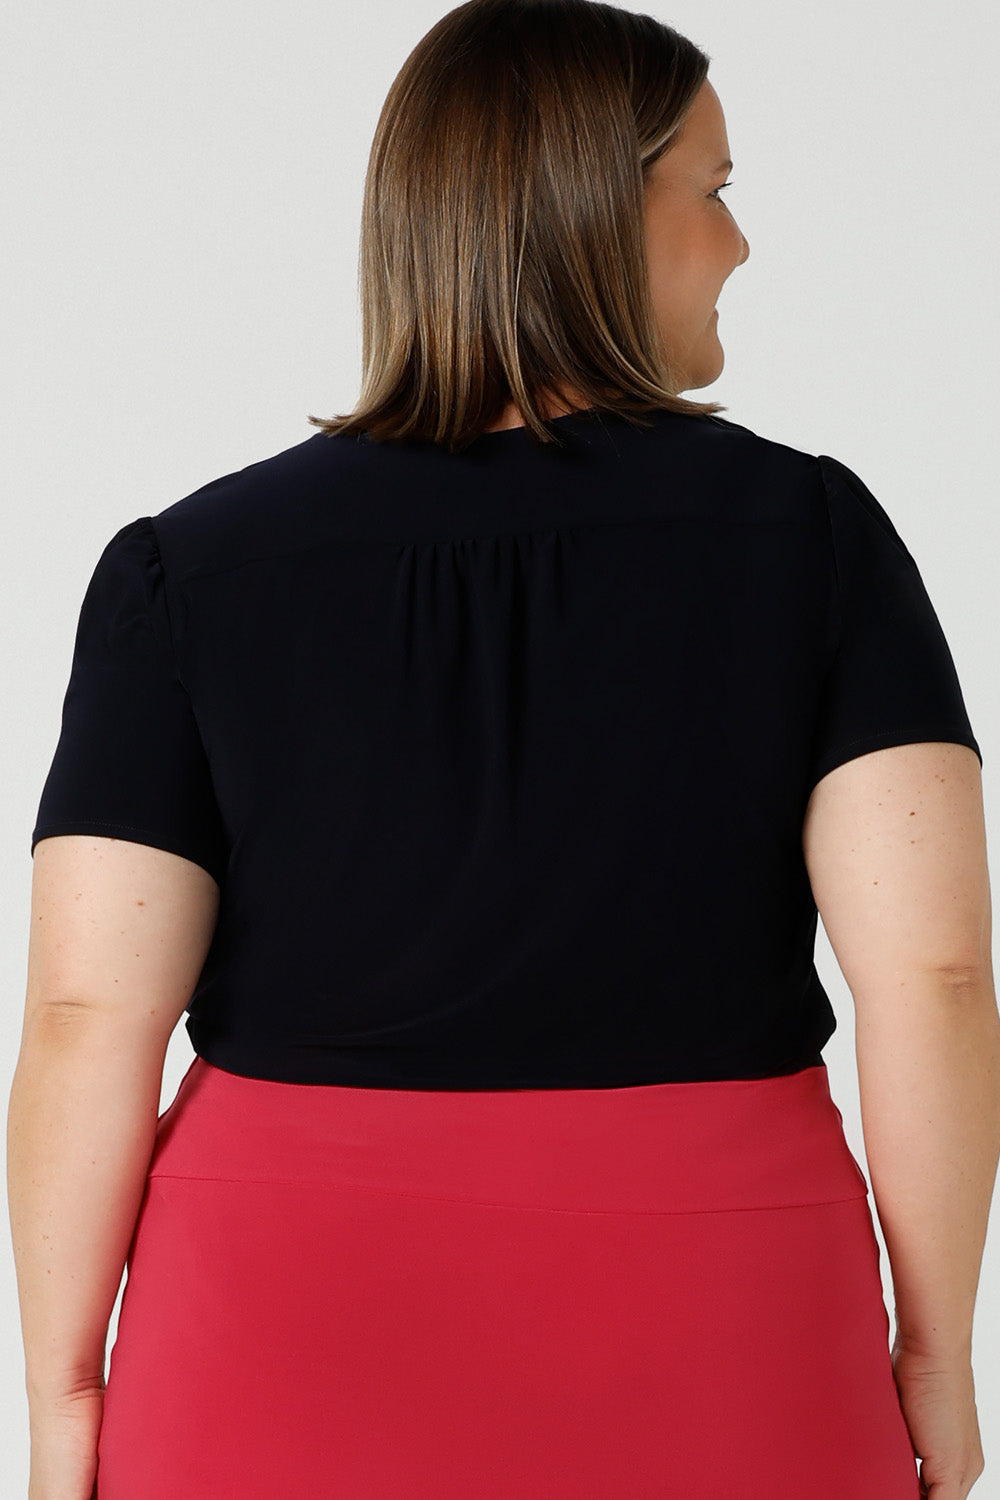  Back view of a curvy size 18 woman wears a navy jersey top great for corporate wear.  Styled back with a fuchsia pink tube skirt. This tailored top with short sleeves and a v-neckline is made in Australia by Australian fashion brand, Leina & Fleur in sizes 8 to 24.